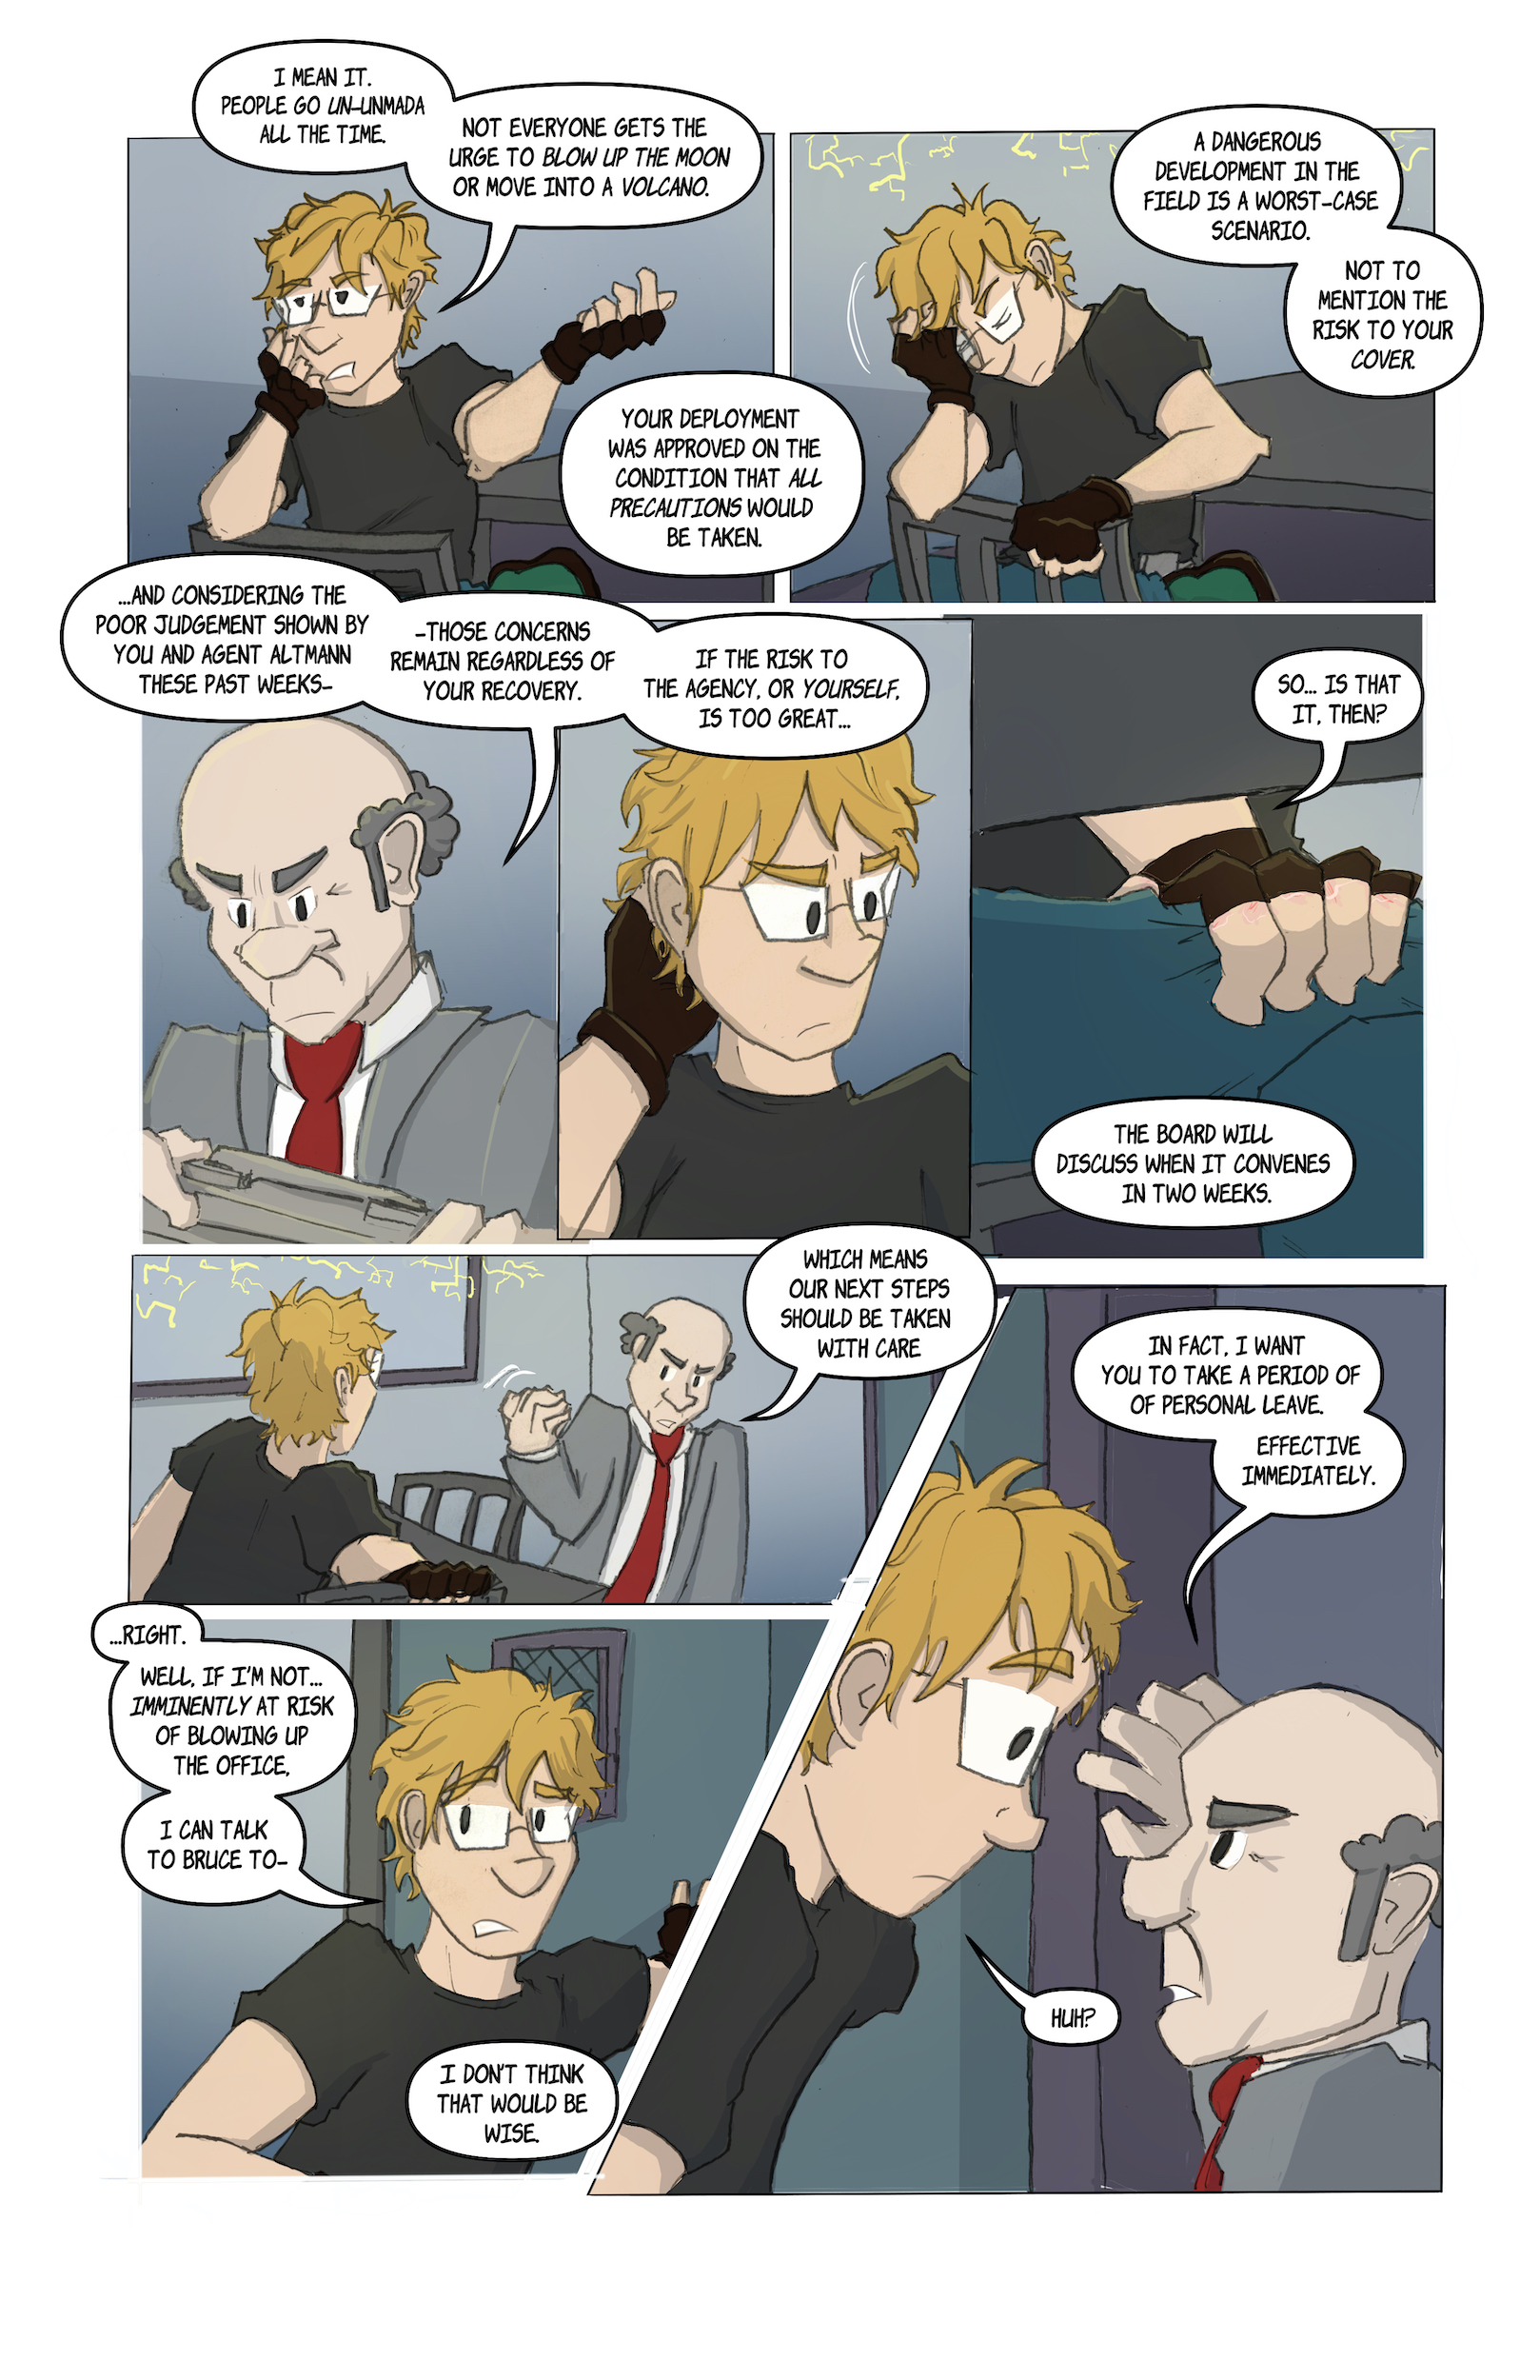 Chapter 1, Page 6